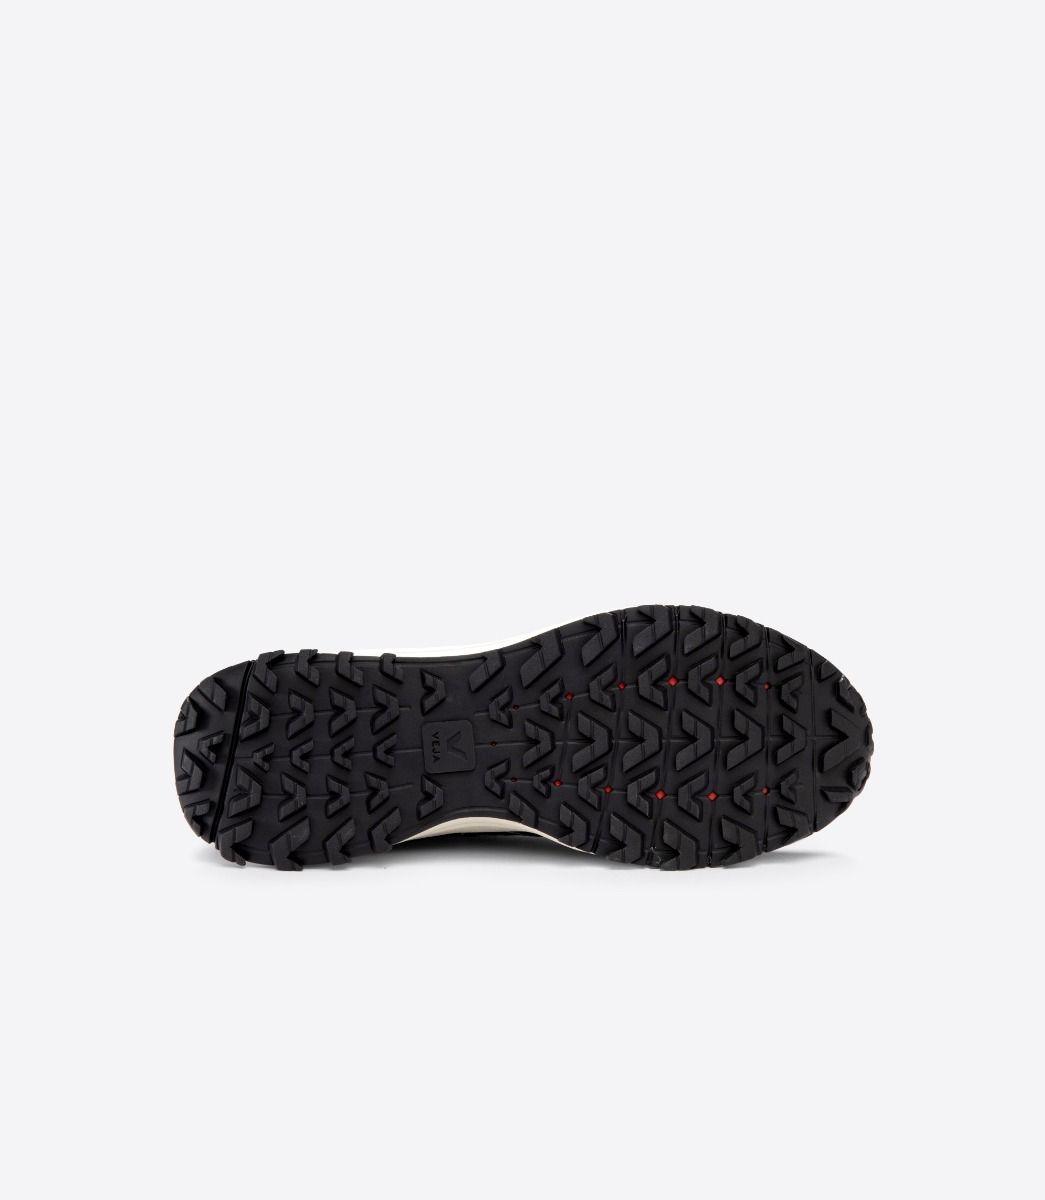 Bottom (outer sole) view of the Men's Fitz Roy Trek Shell by VEJA in the color Basalte/Black